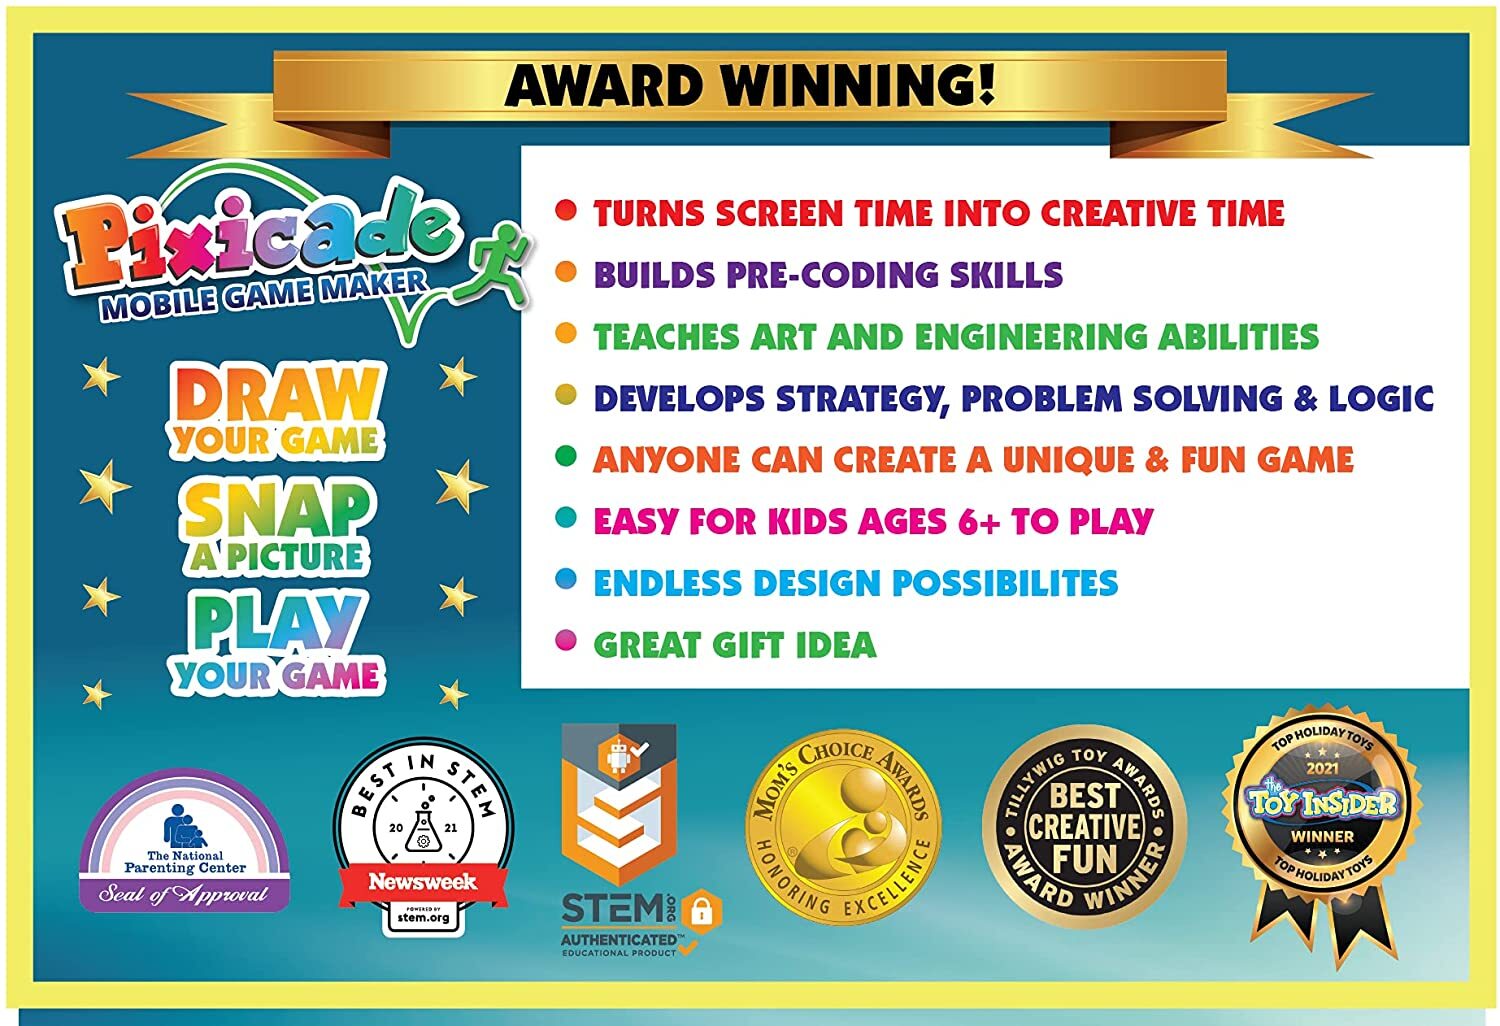 Pixicade Mobile Game Maker Turn Drawing into Playable Games STEM Creative  FUN 740275056912